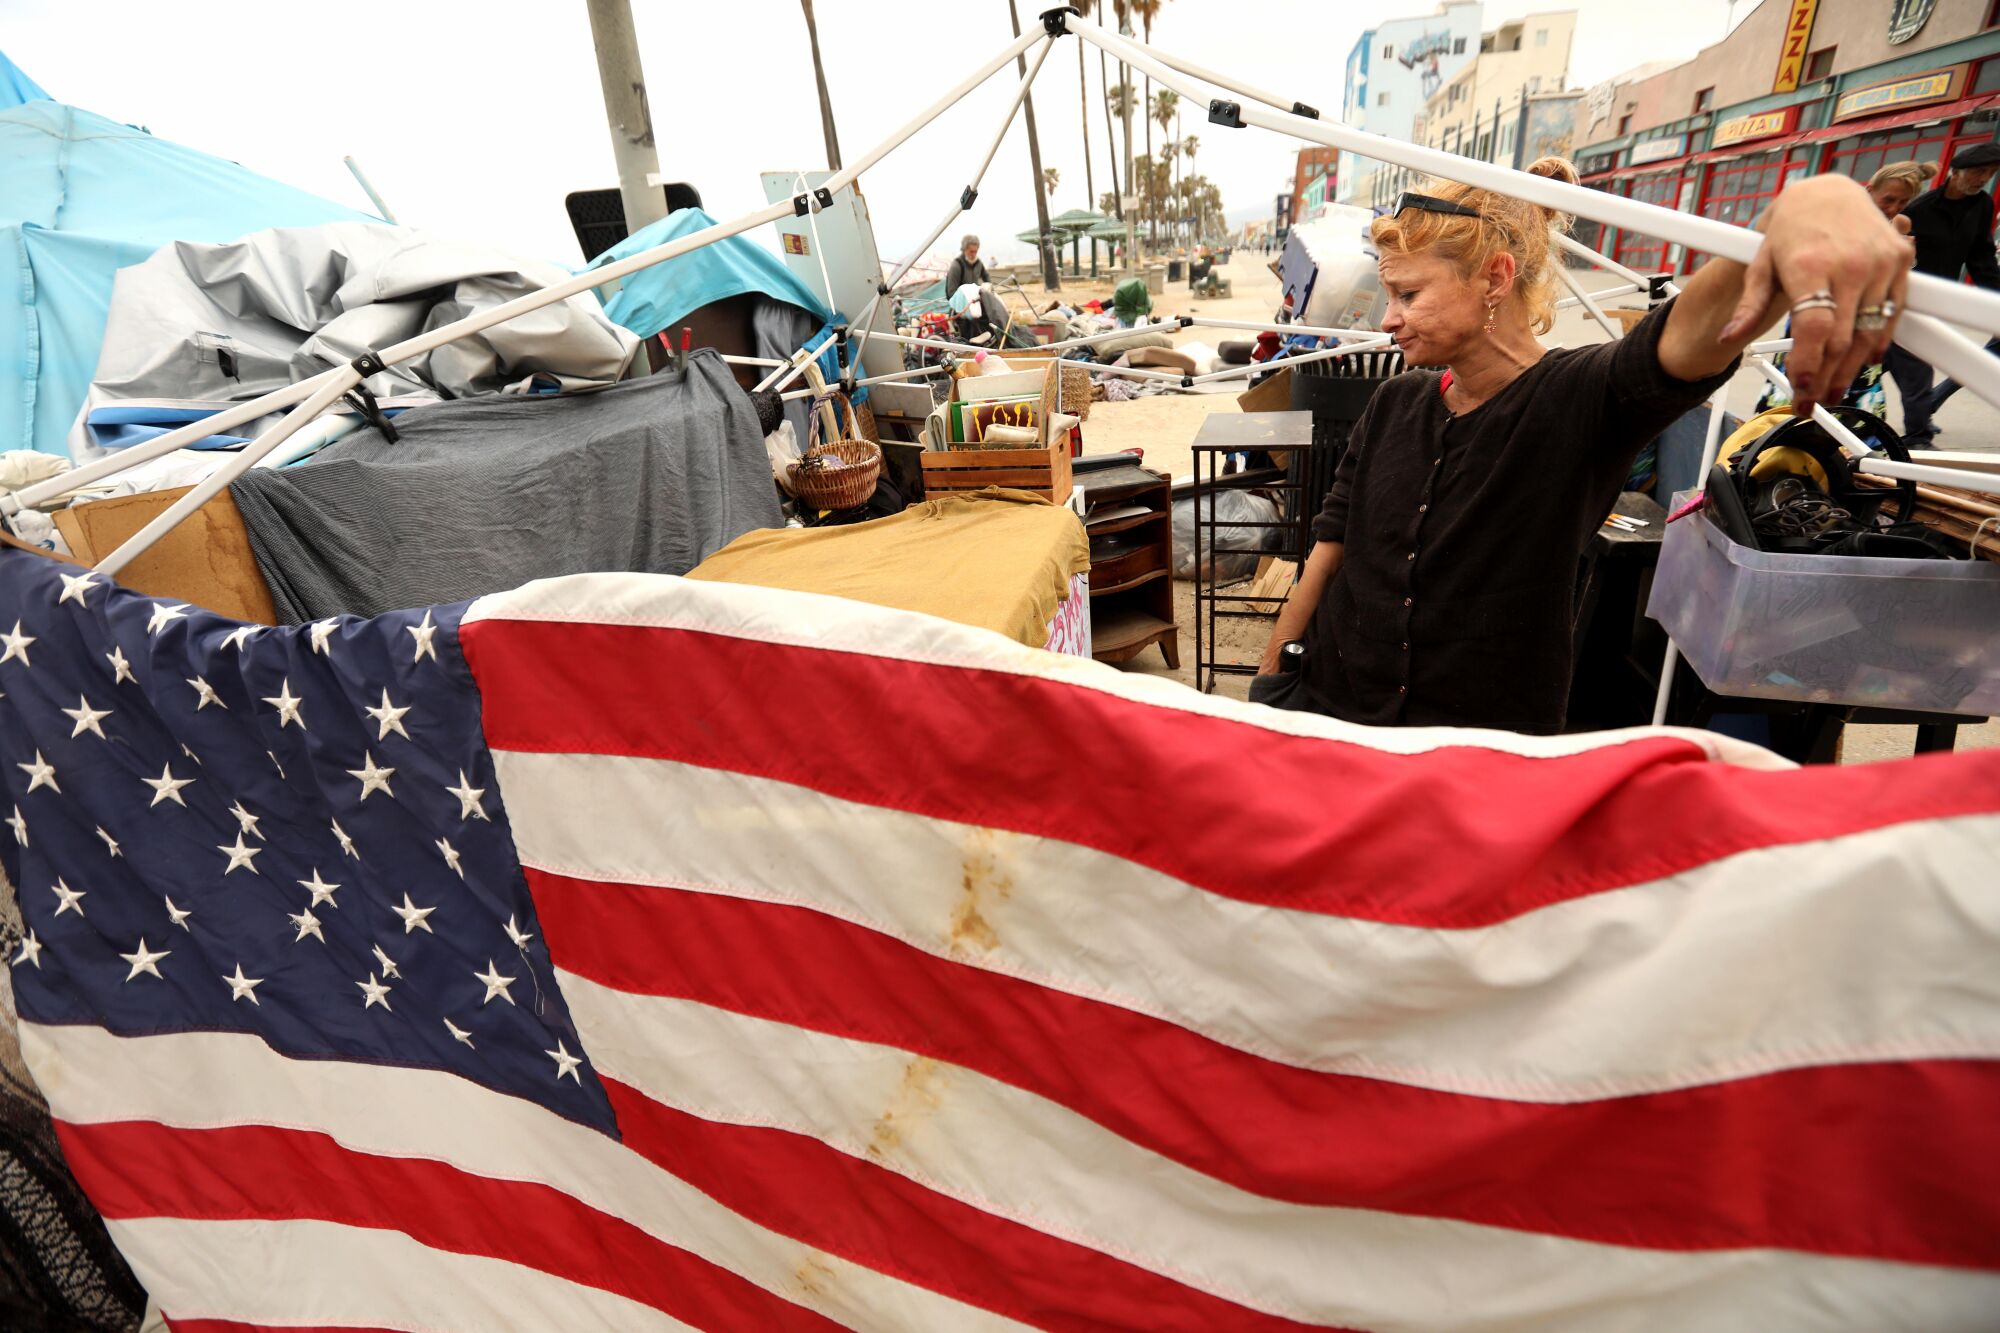 A woman stands in a homeless camp with an American flag in the front